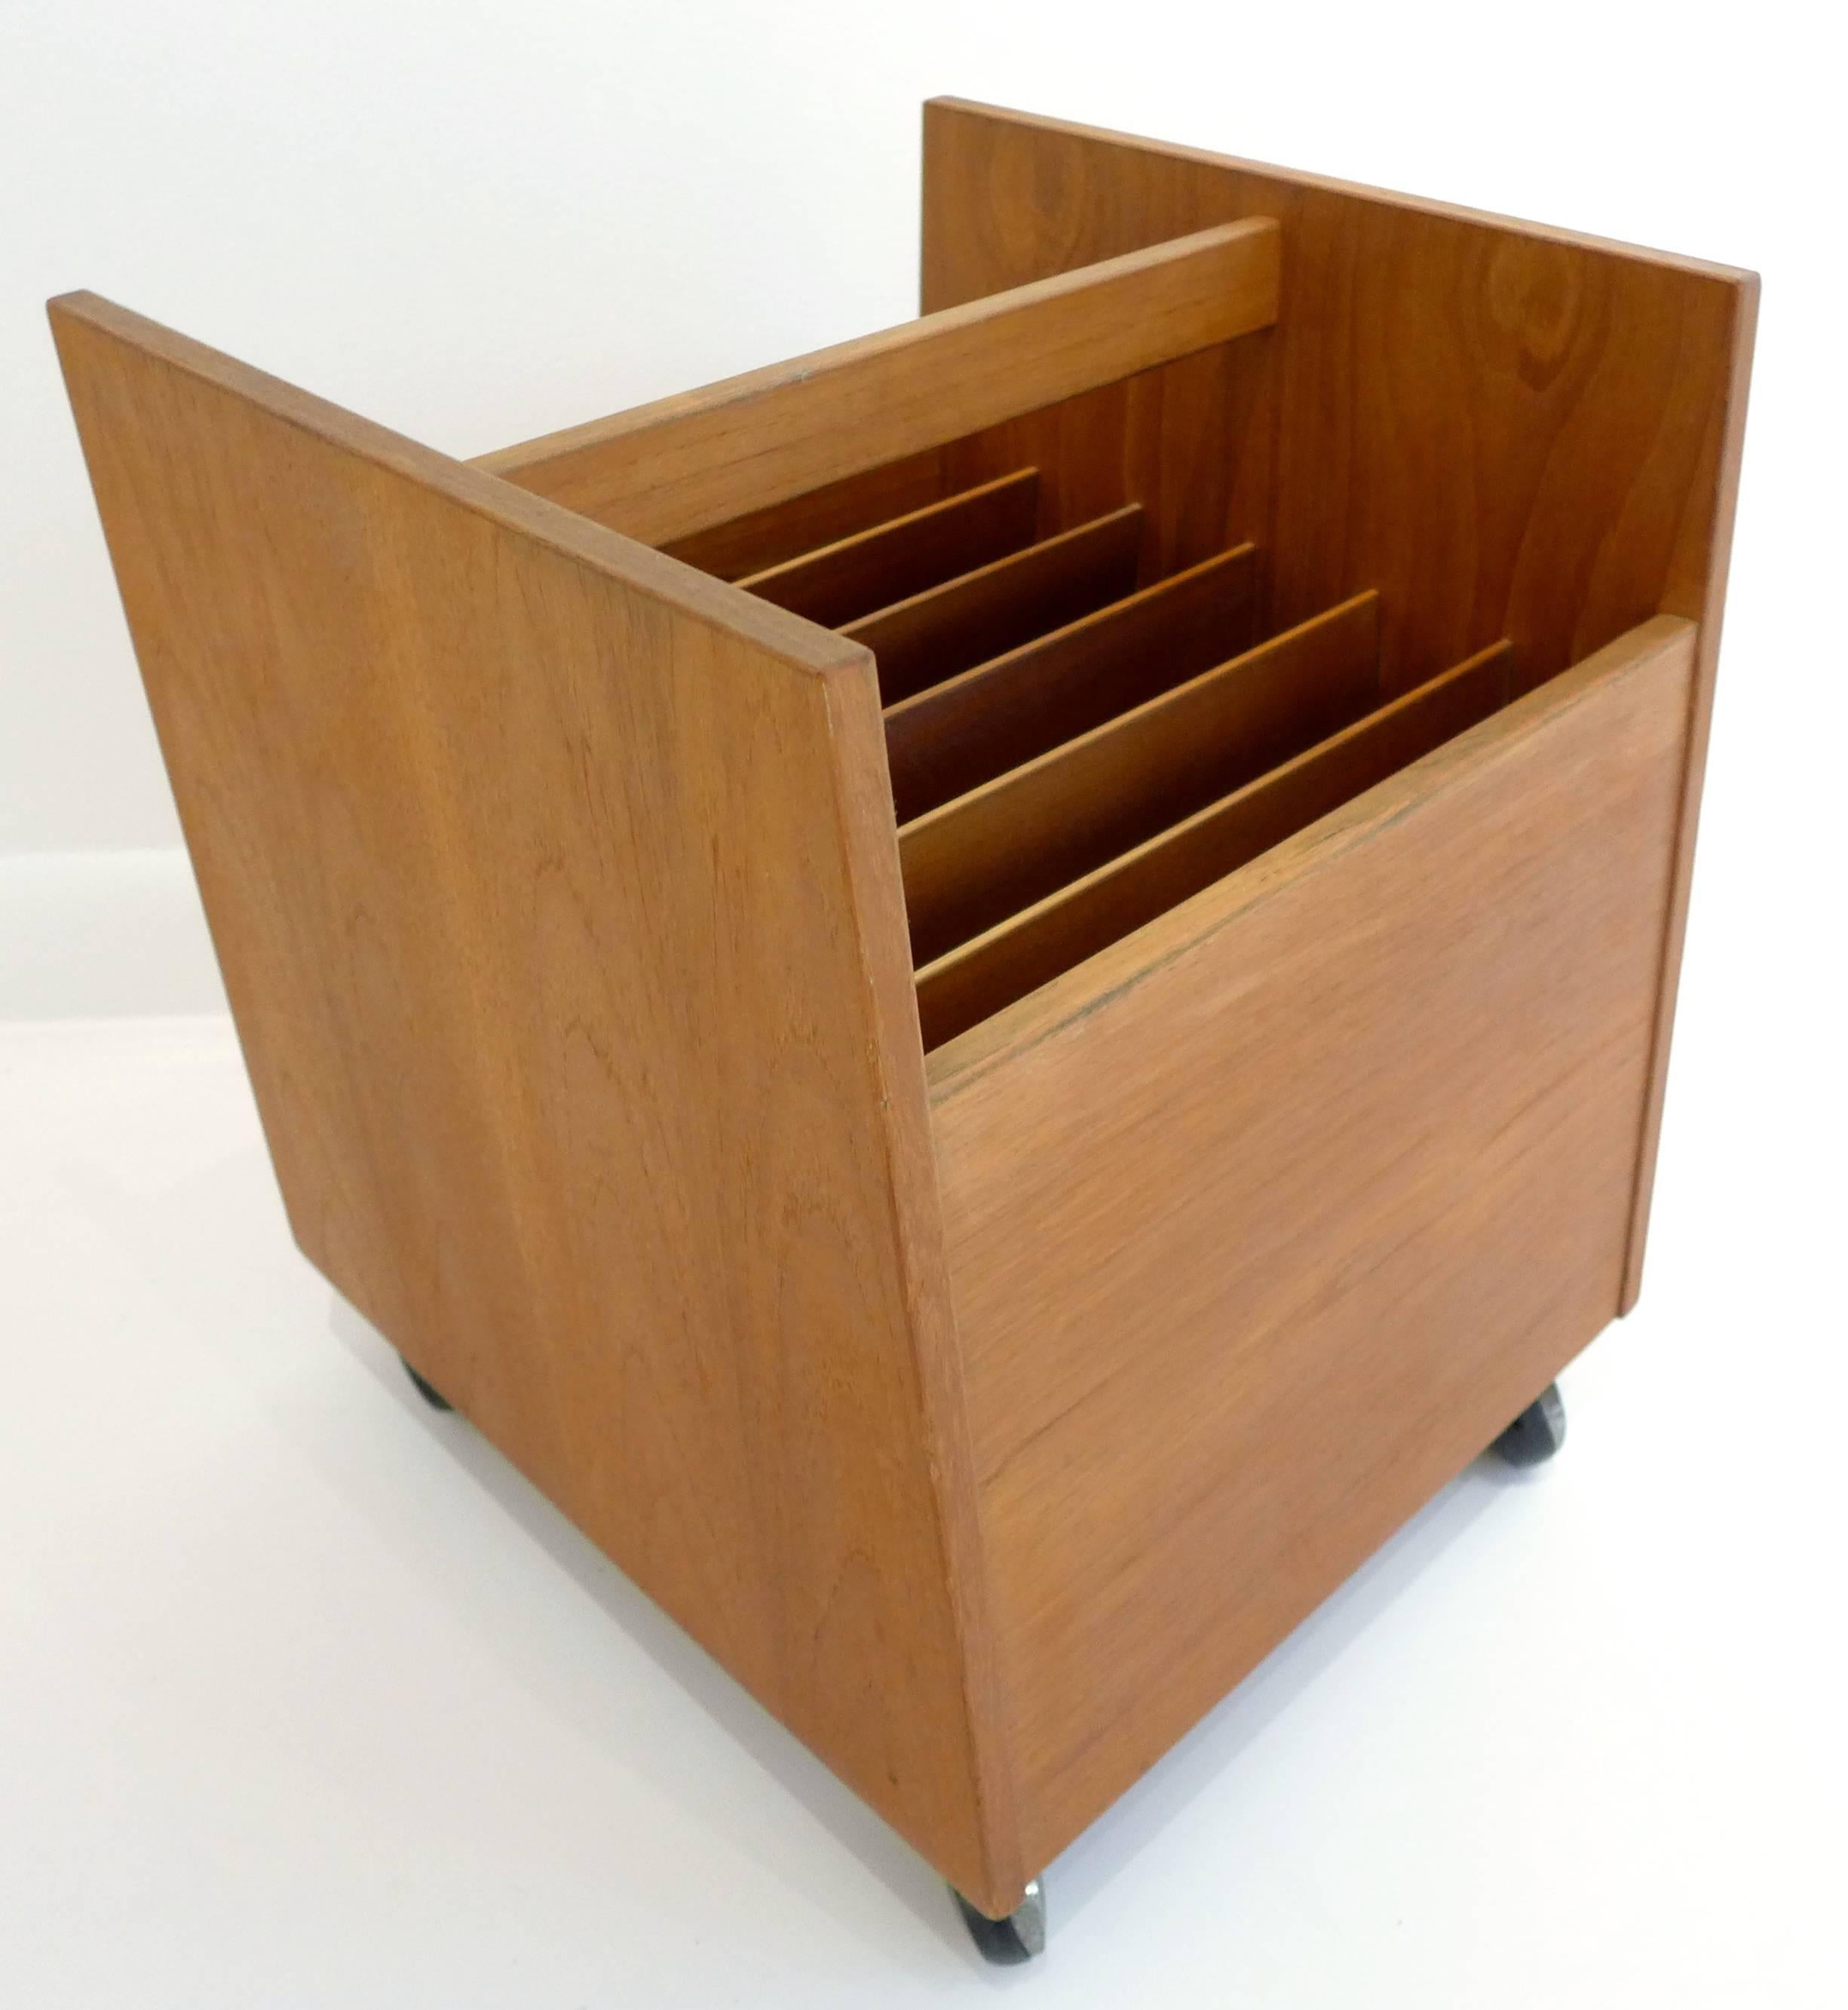 Teak-veneered magazine or record bin with vertical dividers, on casters. Designed by Rolf Hesland for Bruksbo, Norway, circa 1960s. Retains original label.